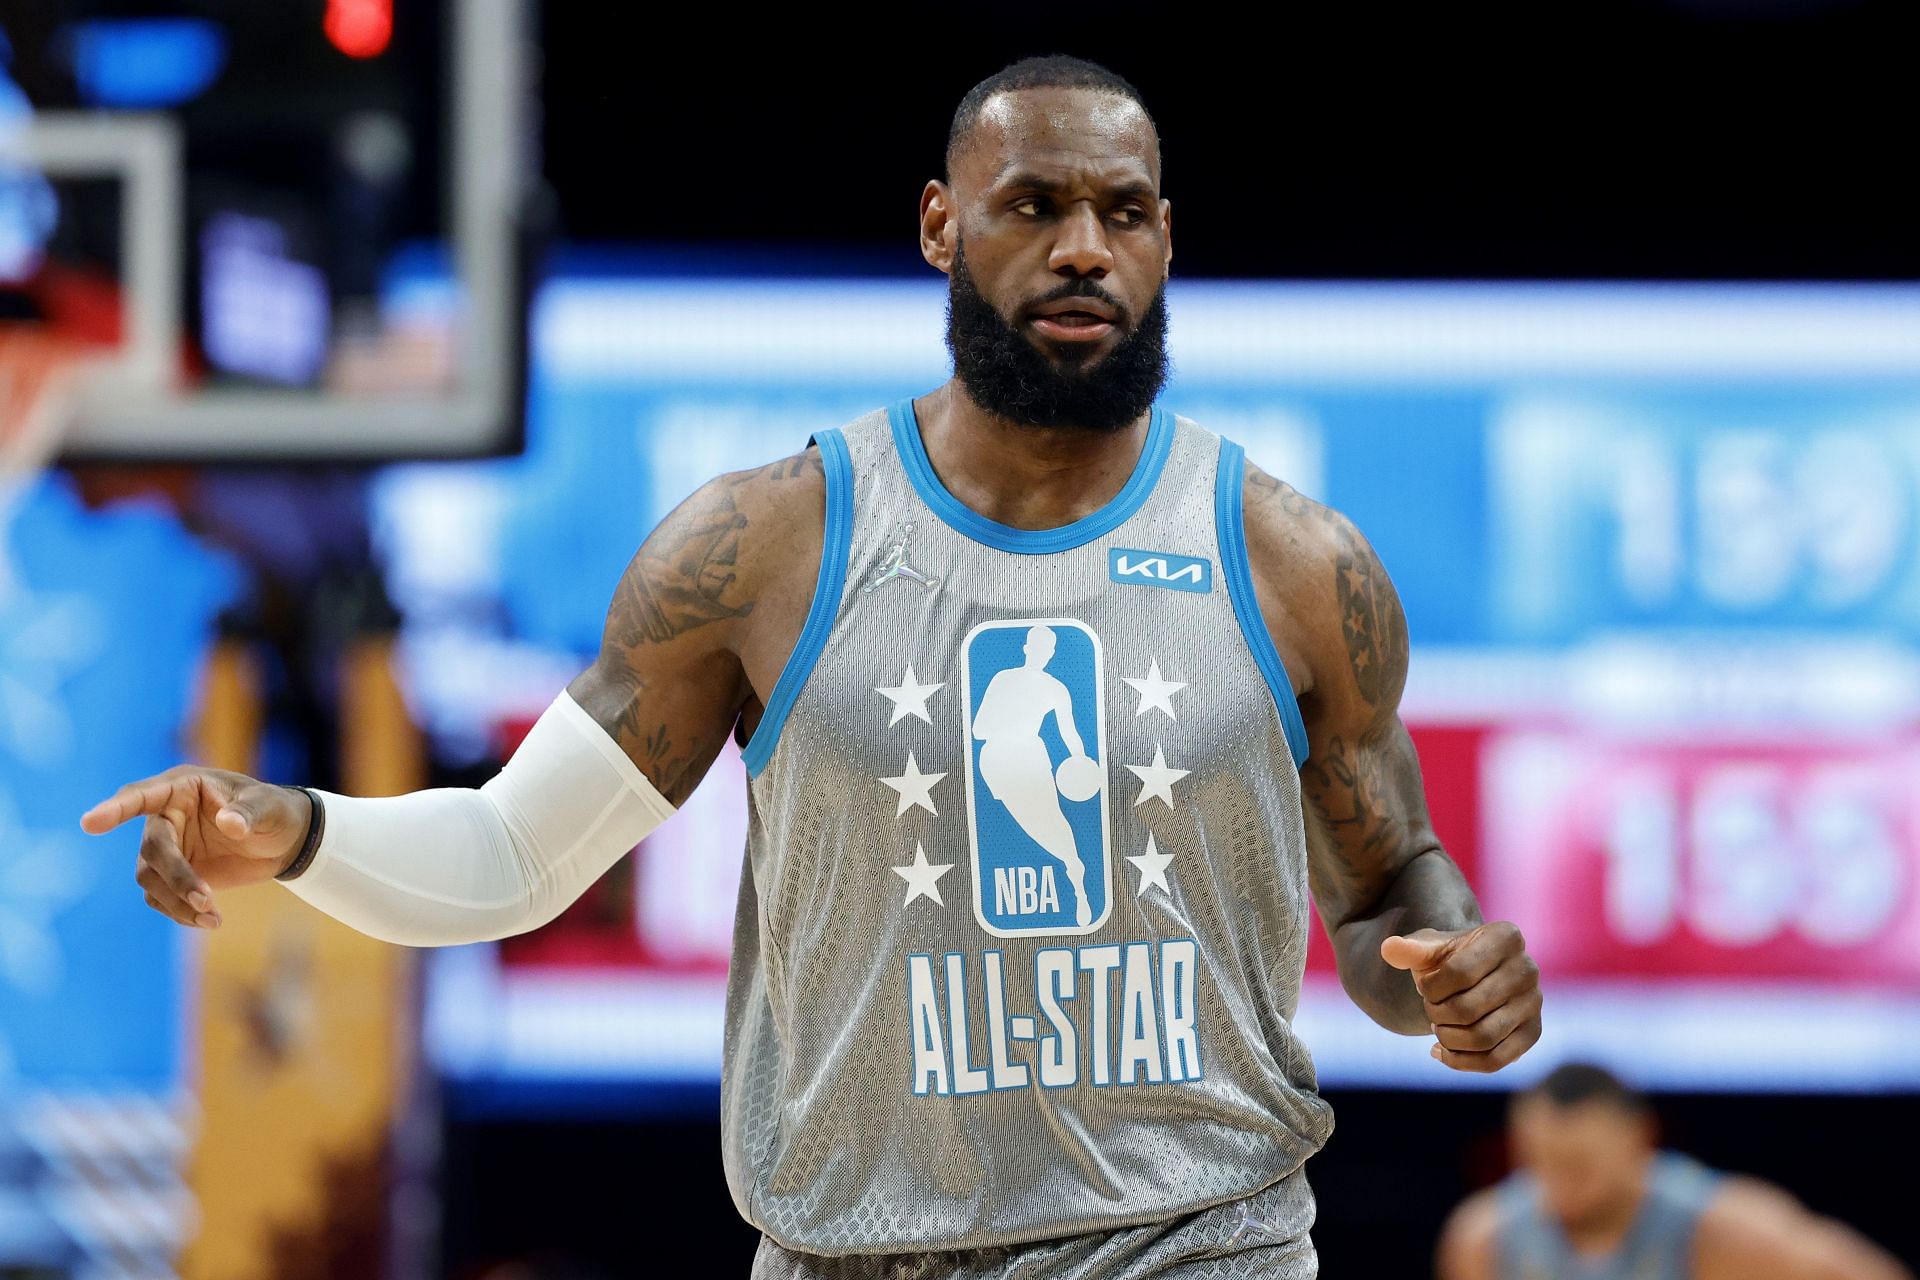 LeBron James during the 2022 All-Star game held in Cleveland.